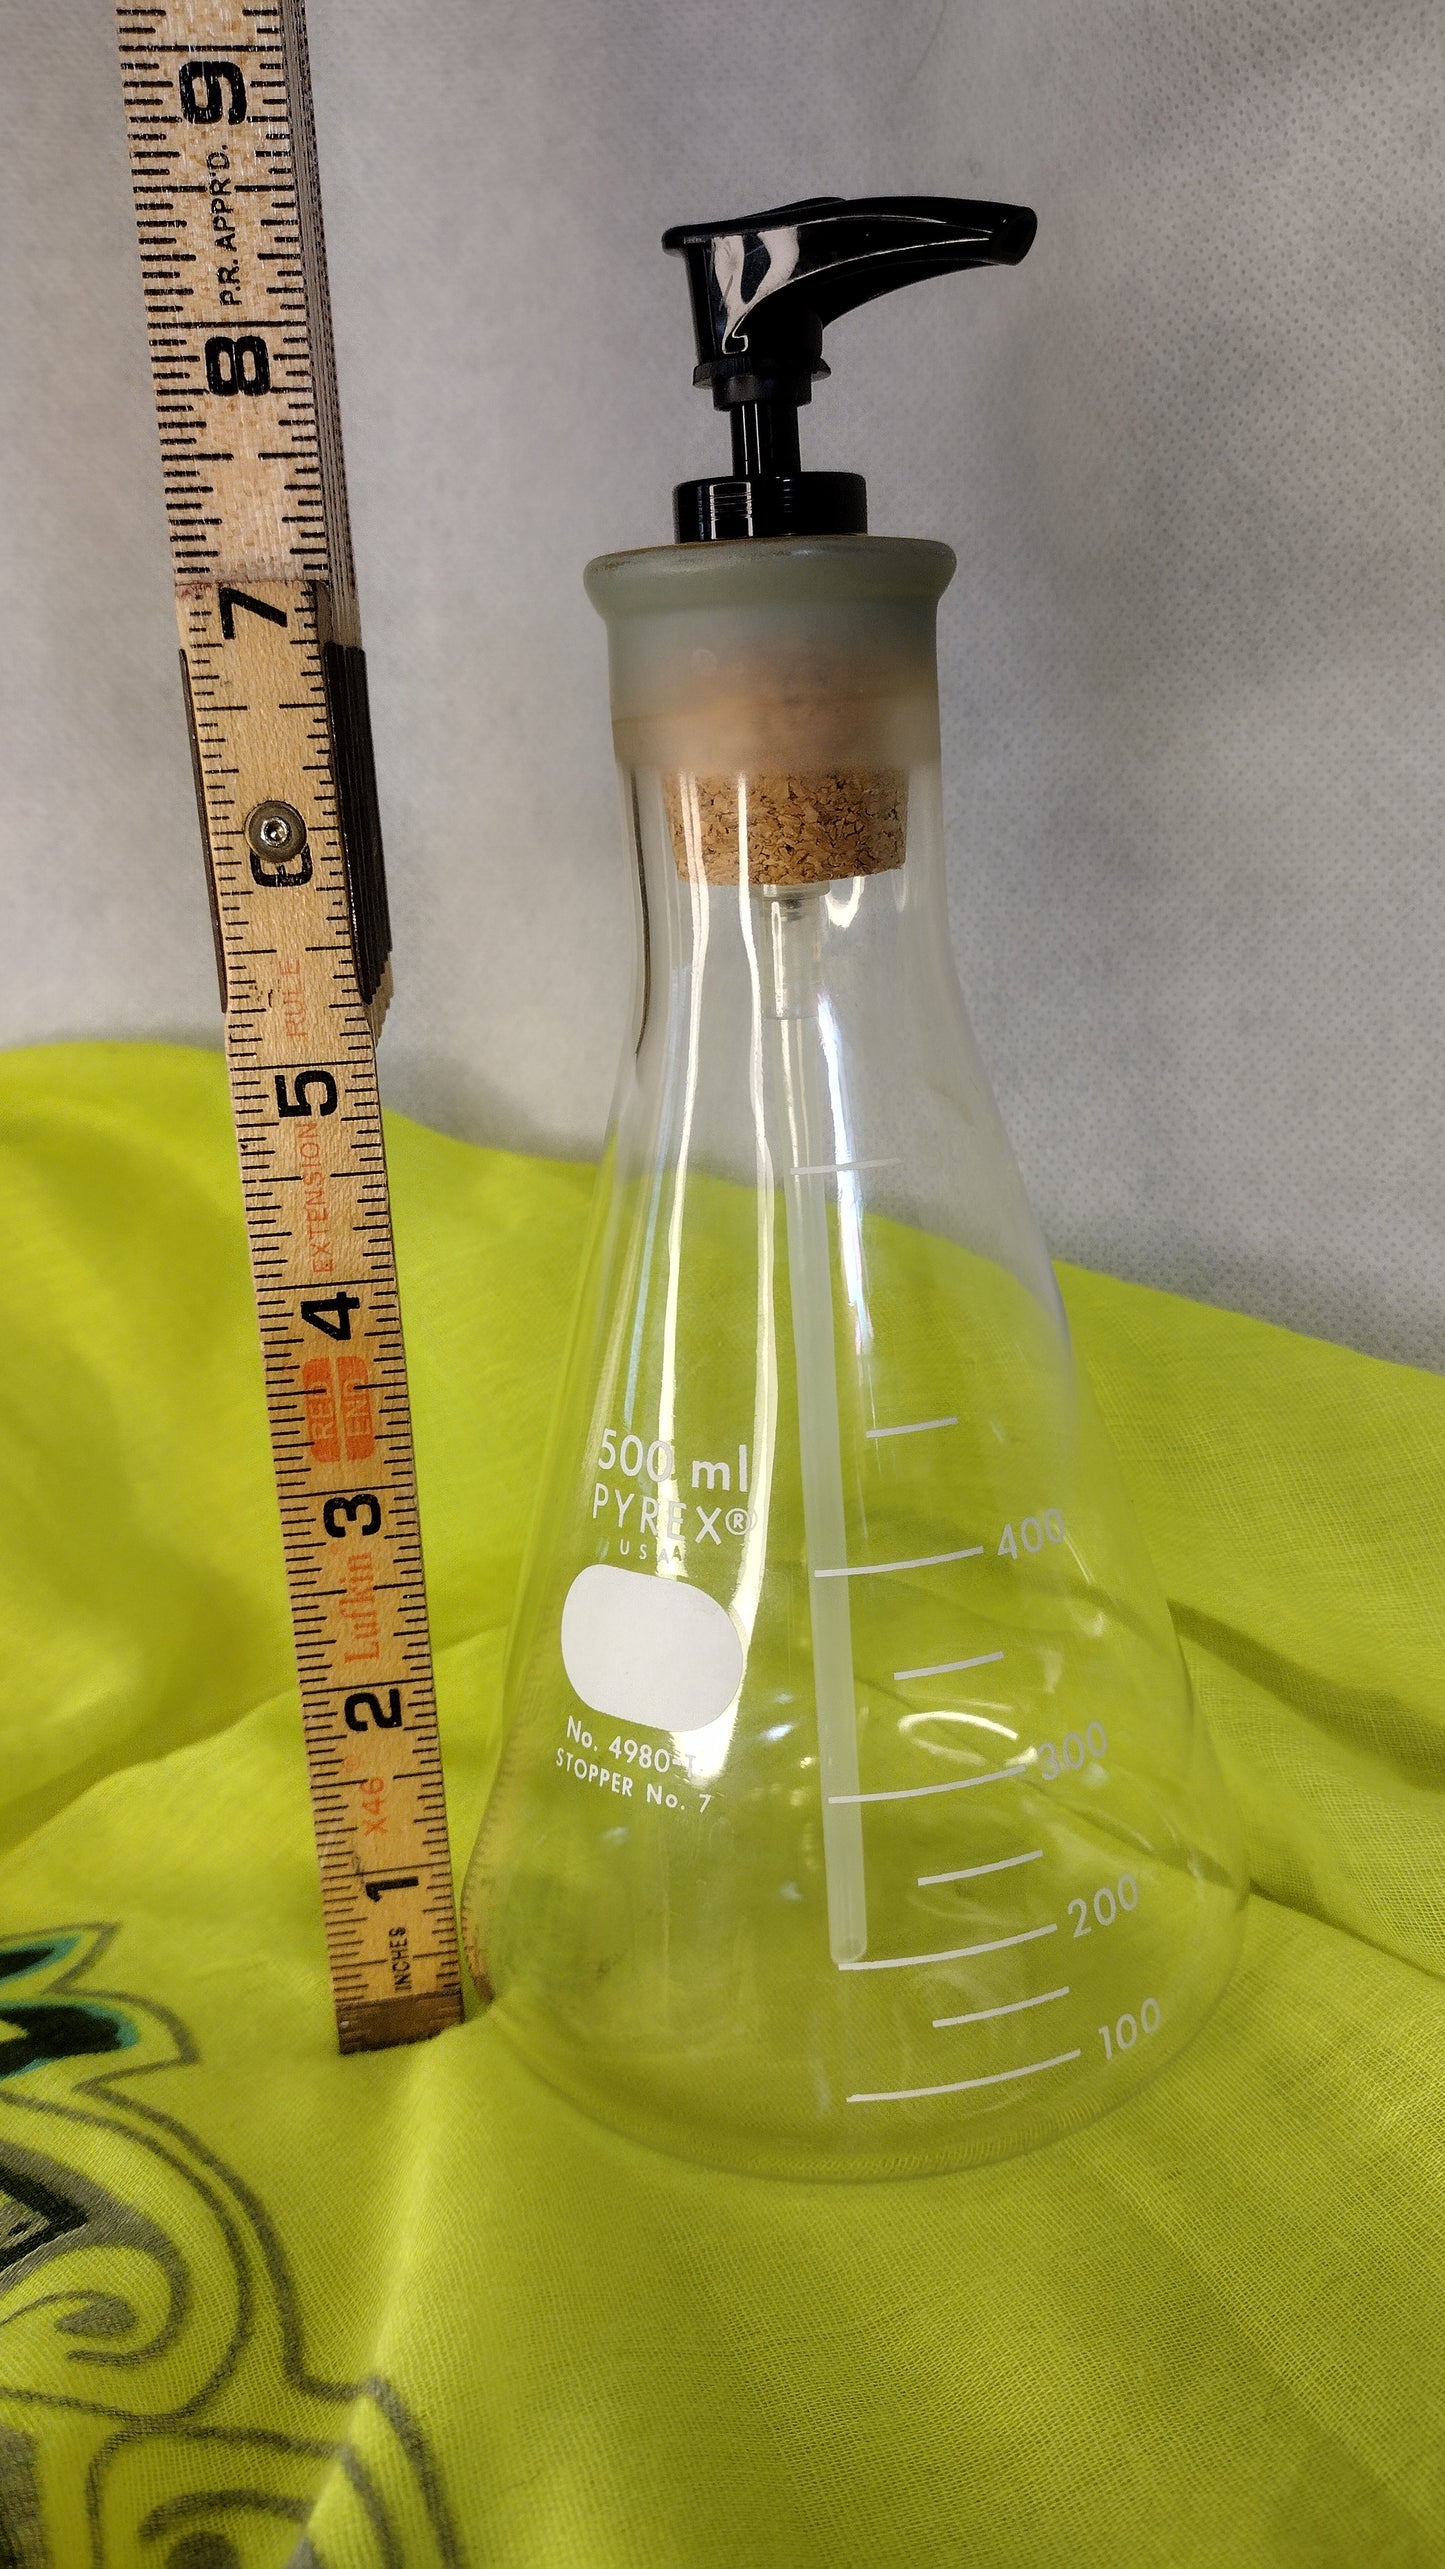 Laboratory flask-turned dispenser for soap or lotion 16oz